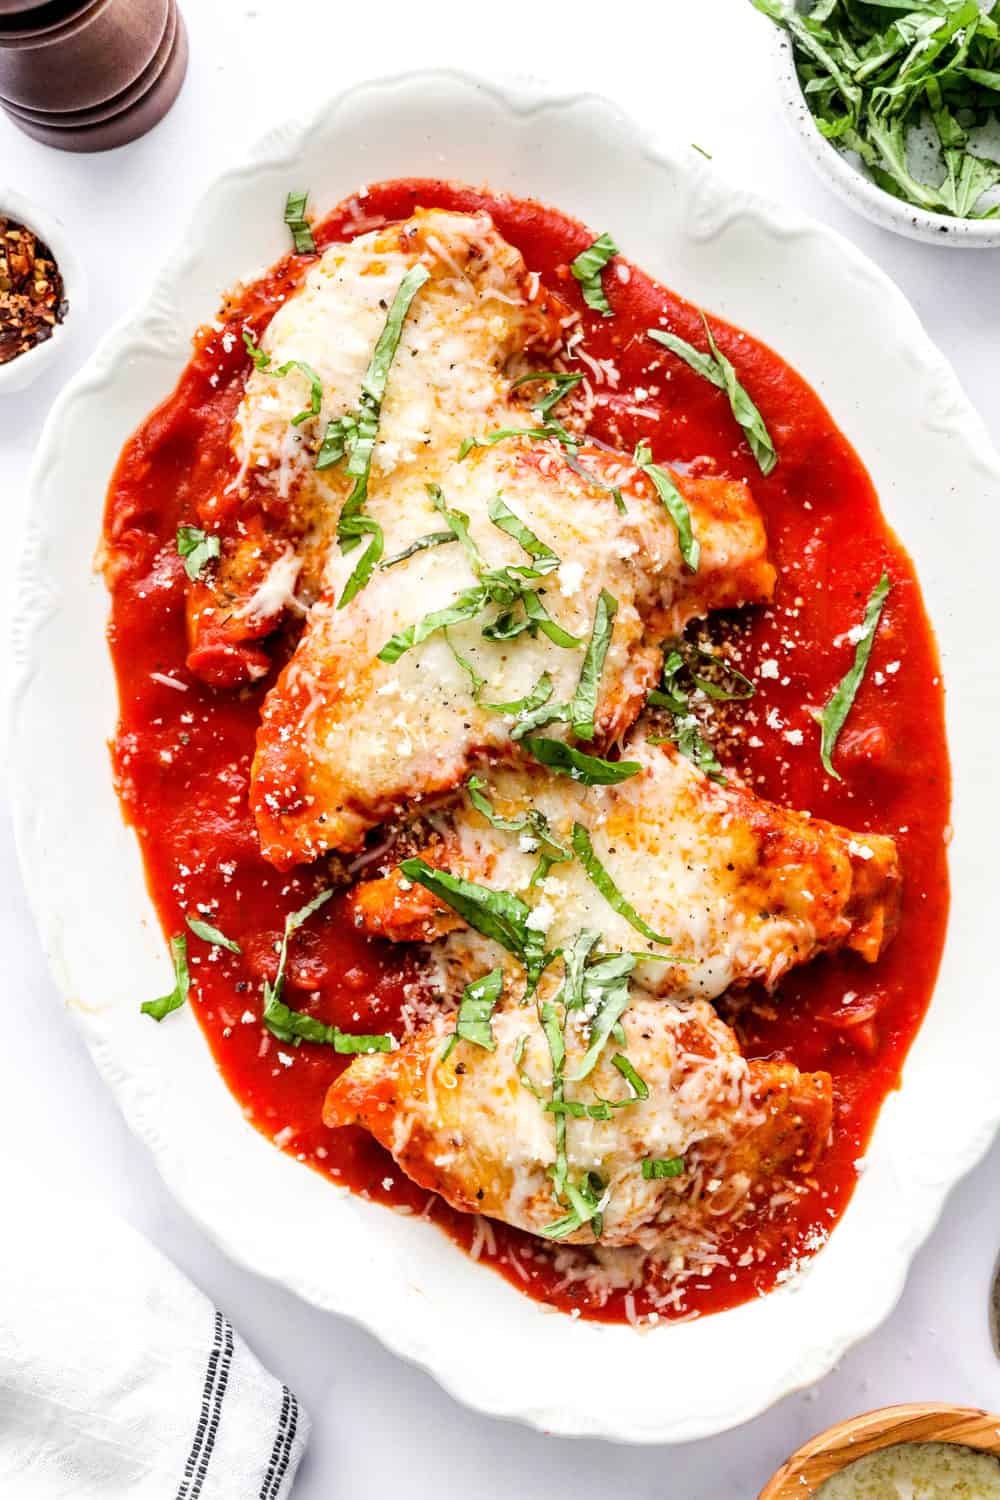 Oval, white platter with tomato sauce spread on the bottom topped with hearty chicken topped with more red sauce and melted cheese, topped with sliced fresh basil